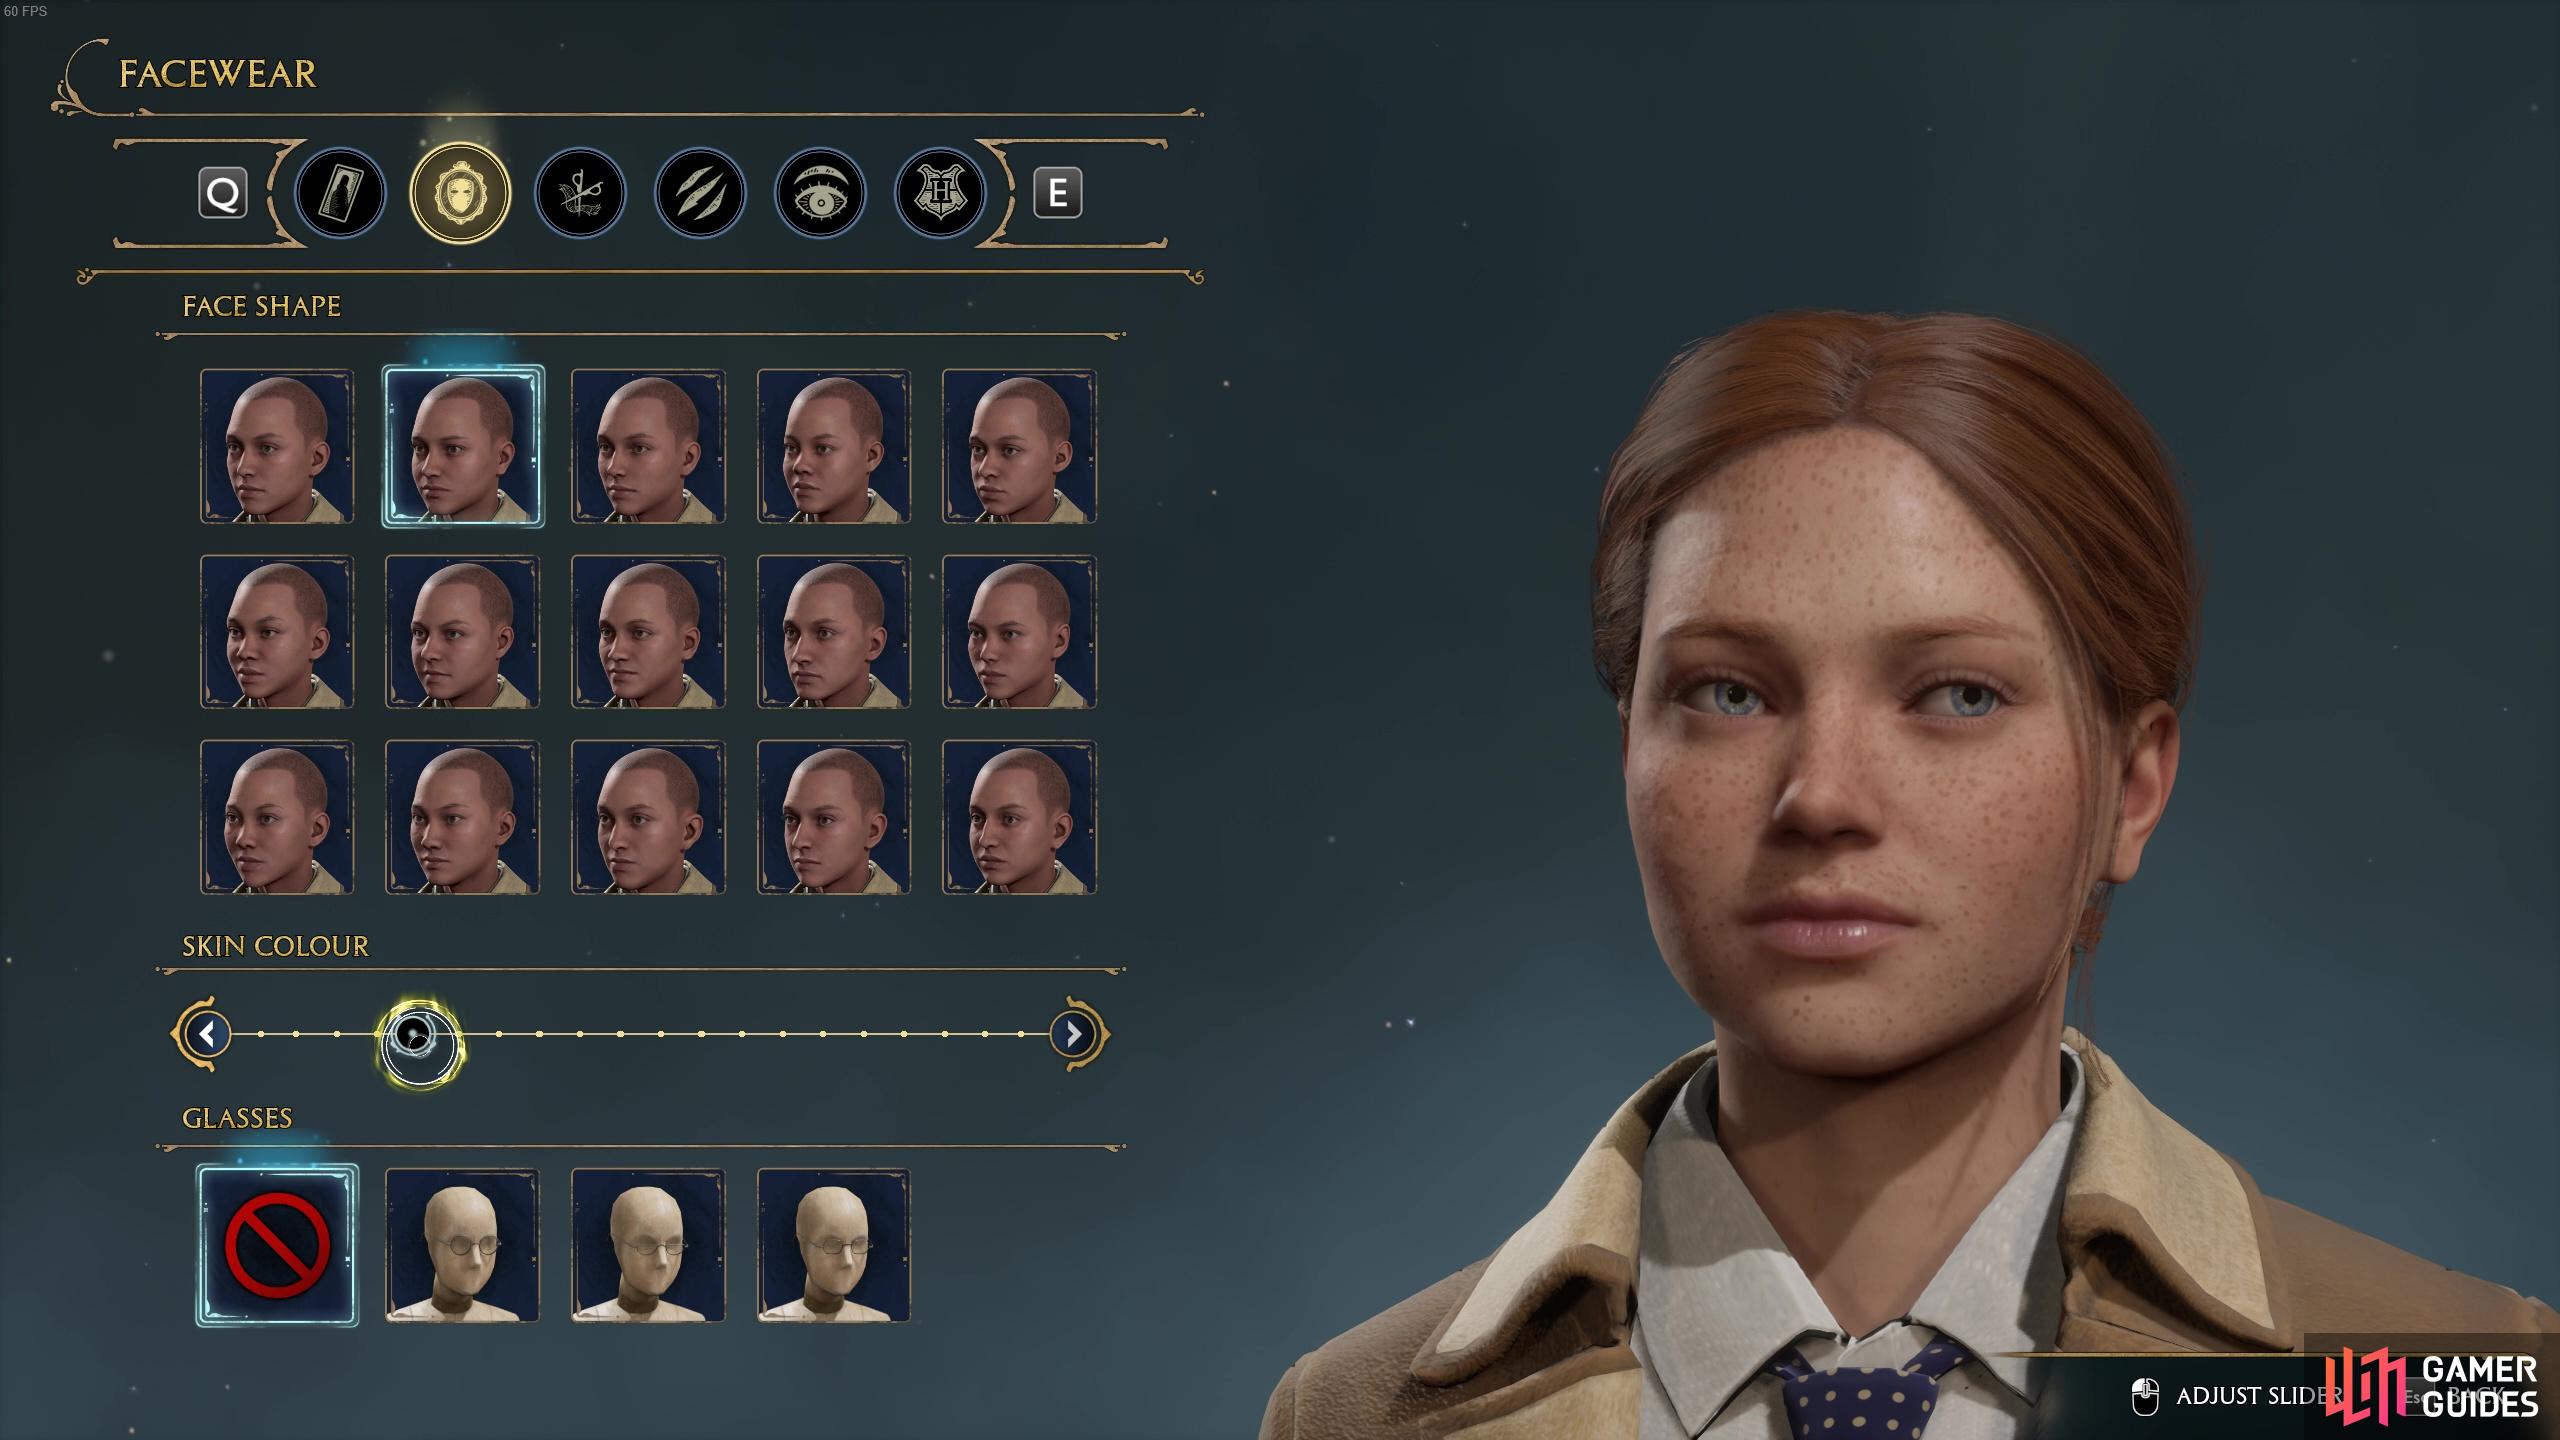 The face shape options will switch up your character’s facial features.